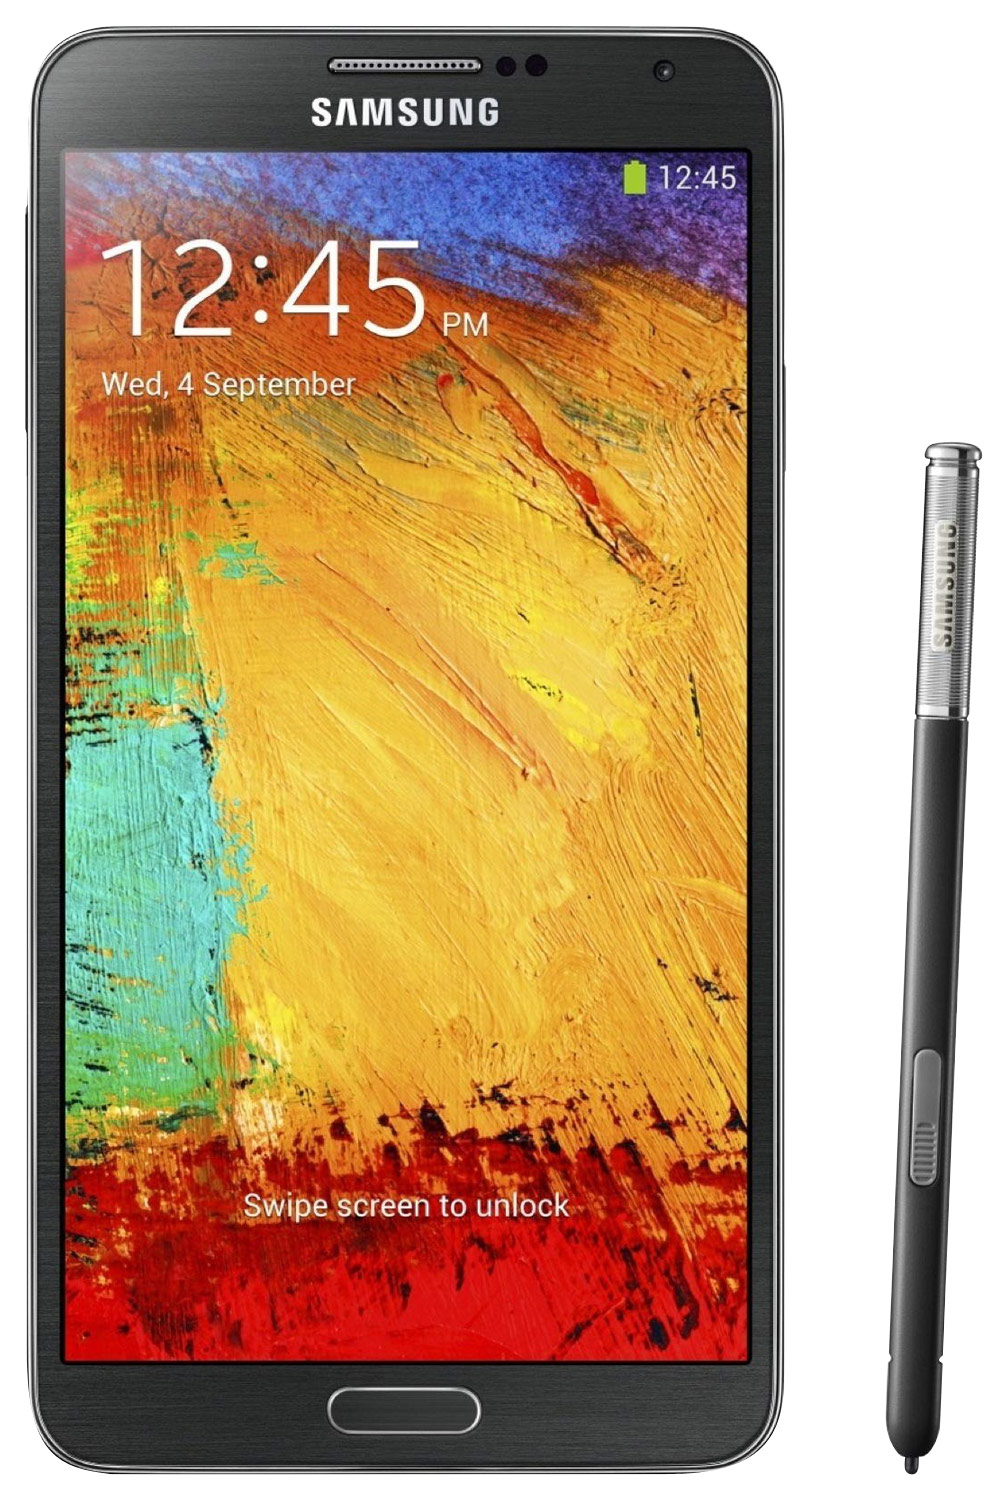 Best Buy Samsung Galaxy Note 3 4g With 32gb Memory Cell Phone Unlocked Black N900a Blk